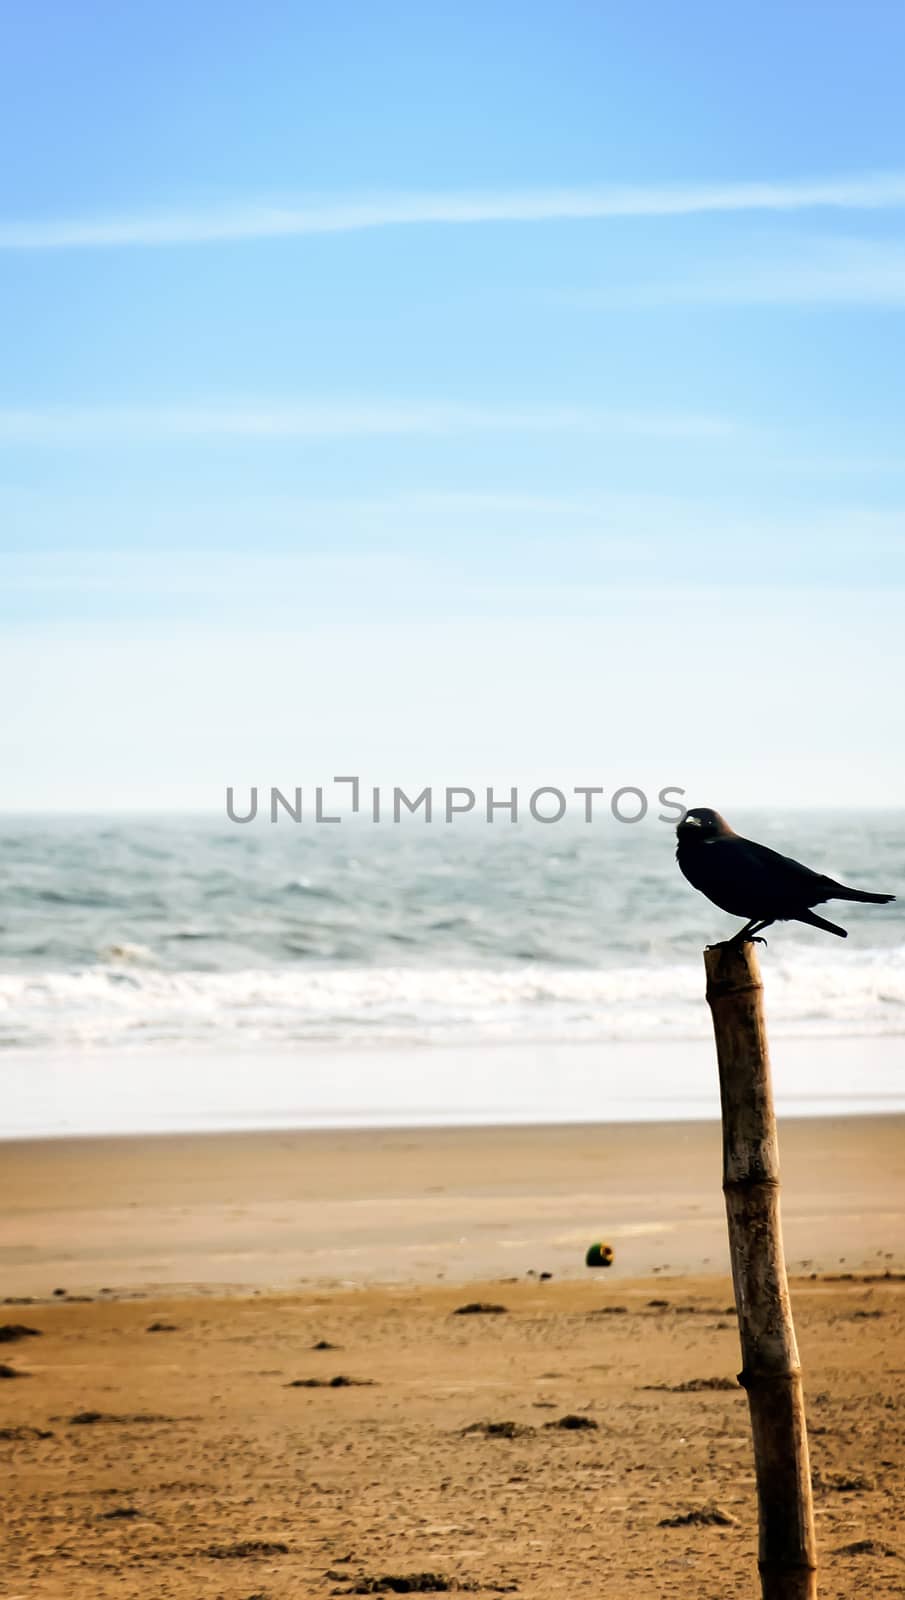 A crow bird sitting on a bamboo palisade wooden boundary post structure. Distant Empty Sea beach Island background. Animal wildlife Theme. Travel Tourism backgrounds. Copy space room for text on left.